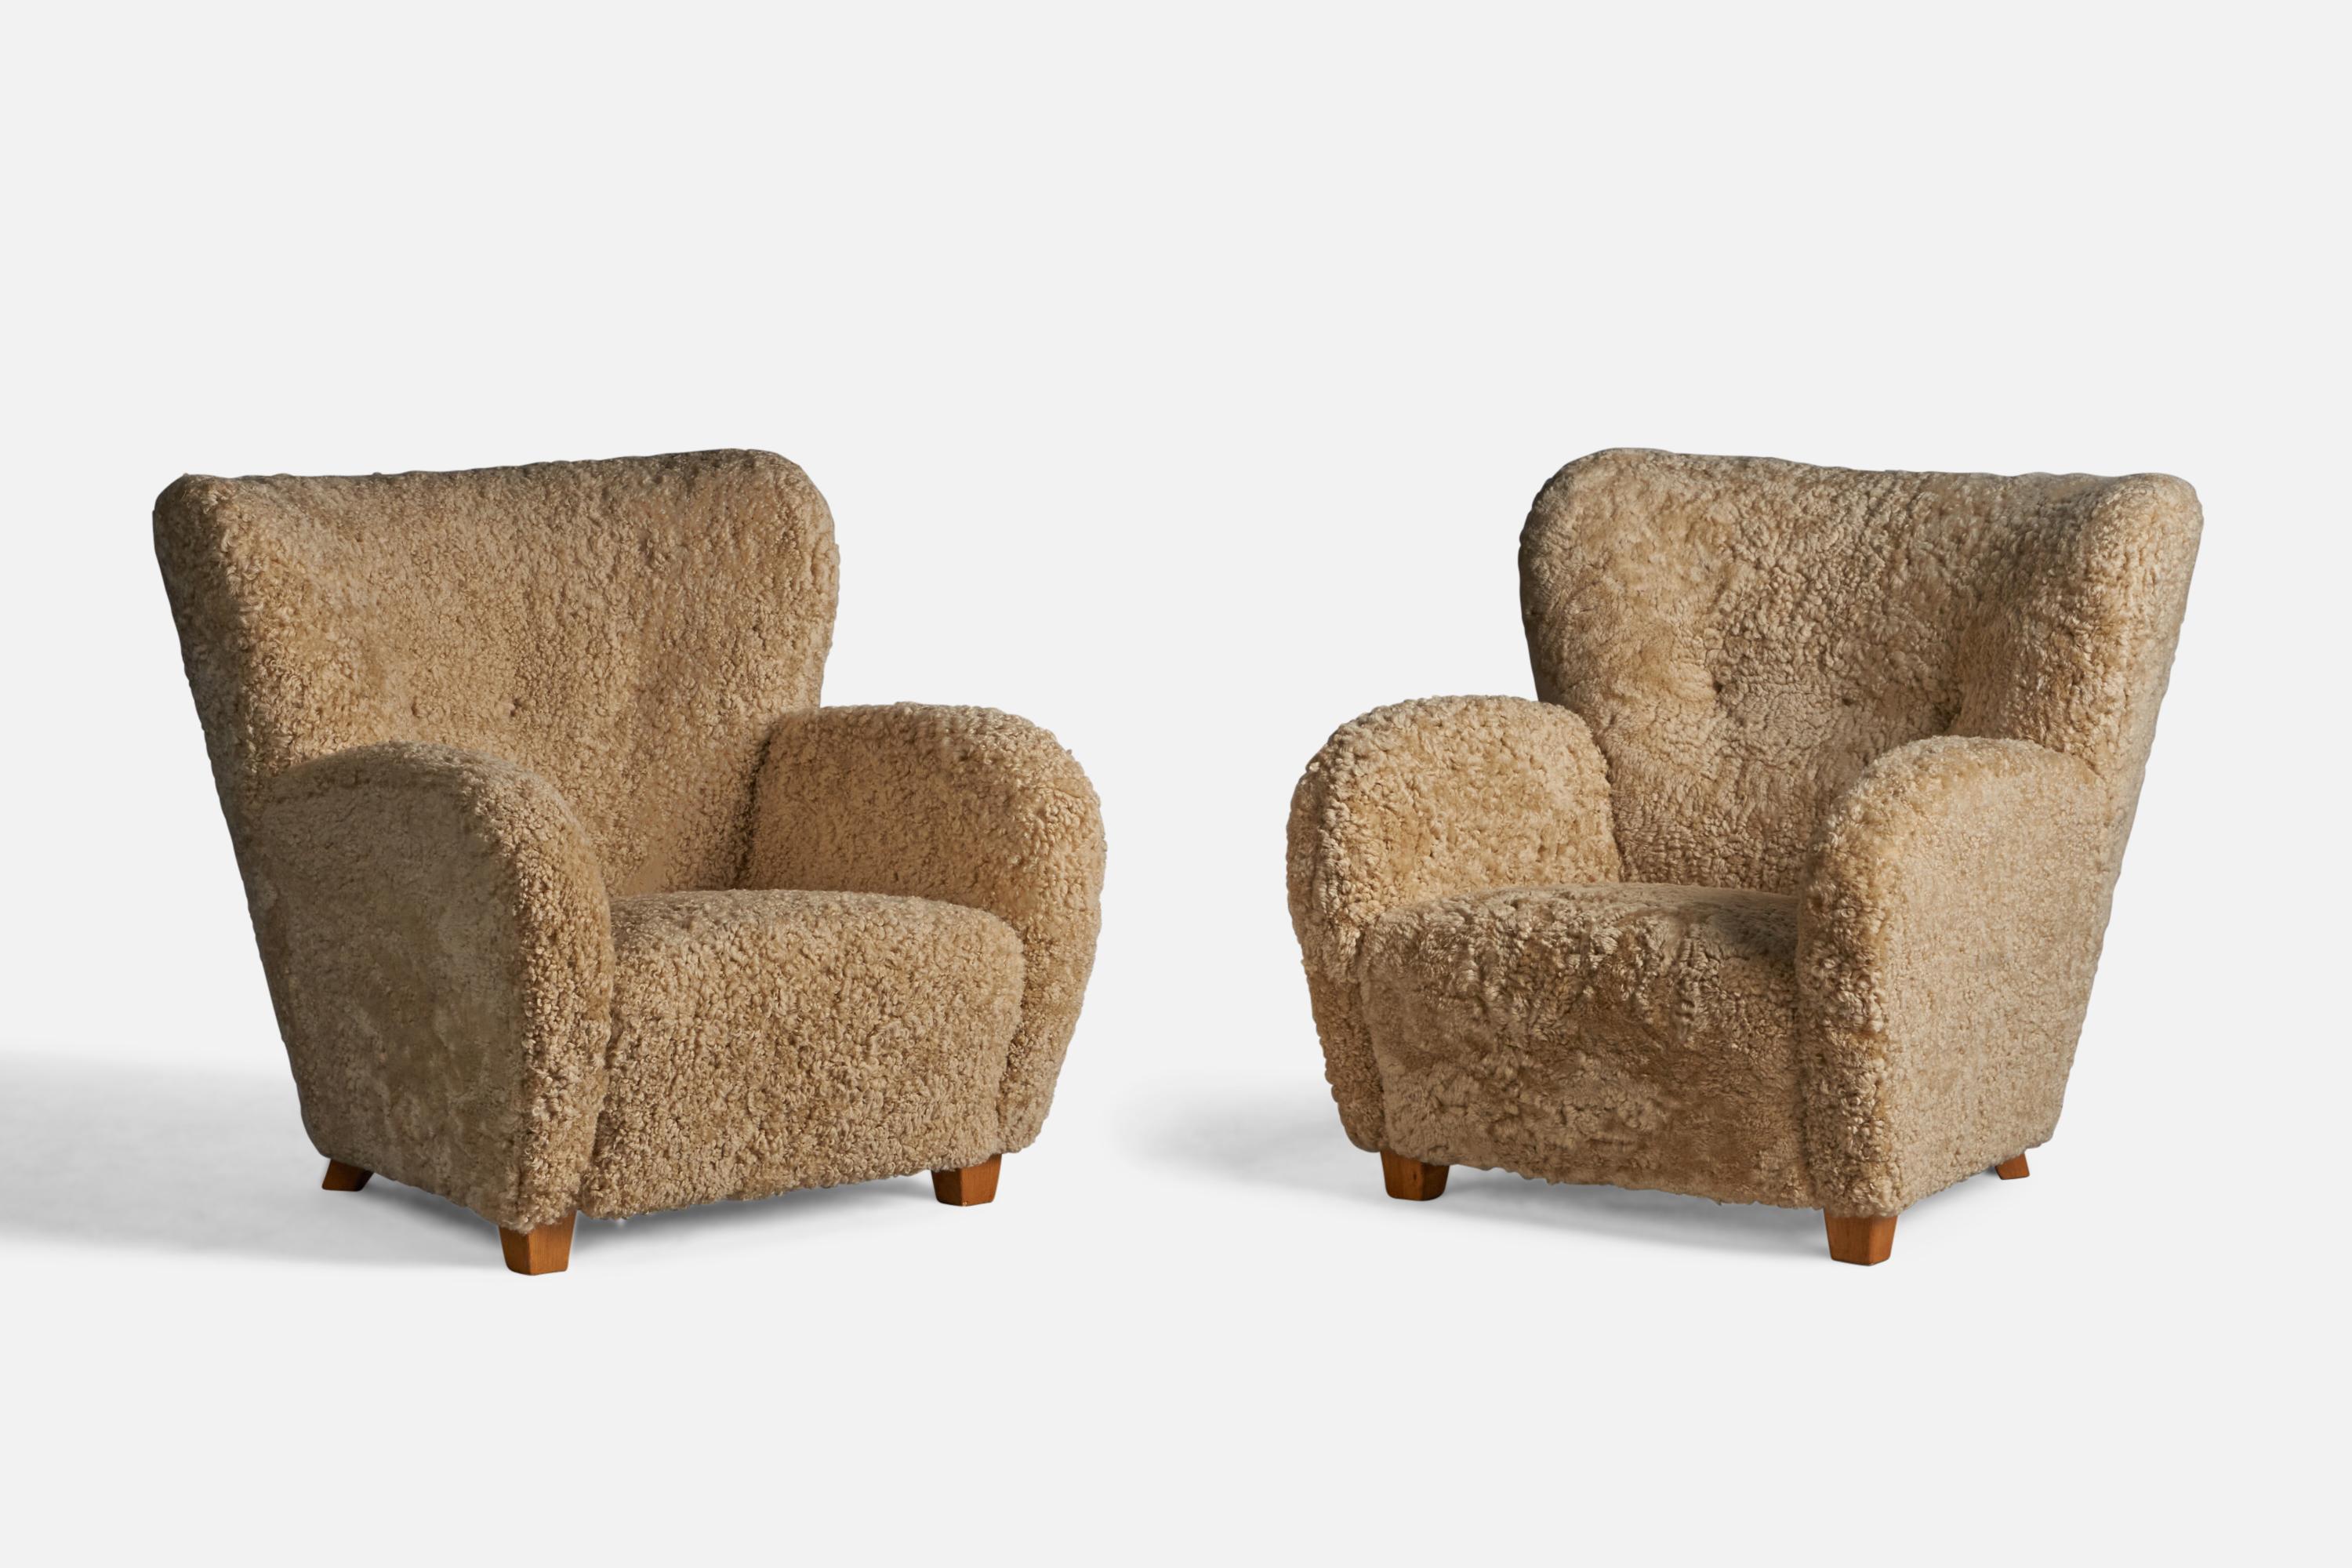 A pair of organic beige shearling and wood lounge chairs designed and produced in Finland, 1940s.

13.5